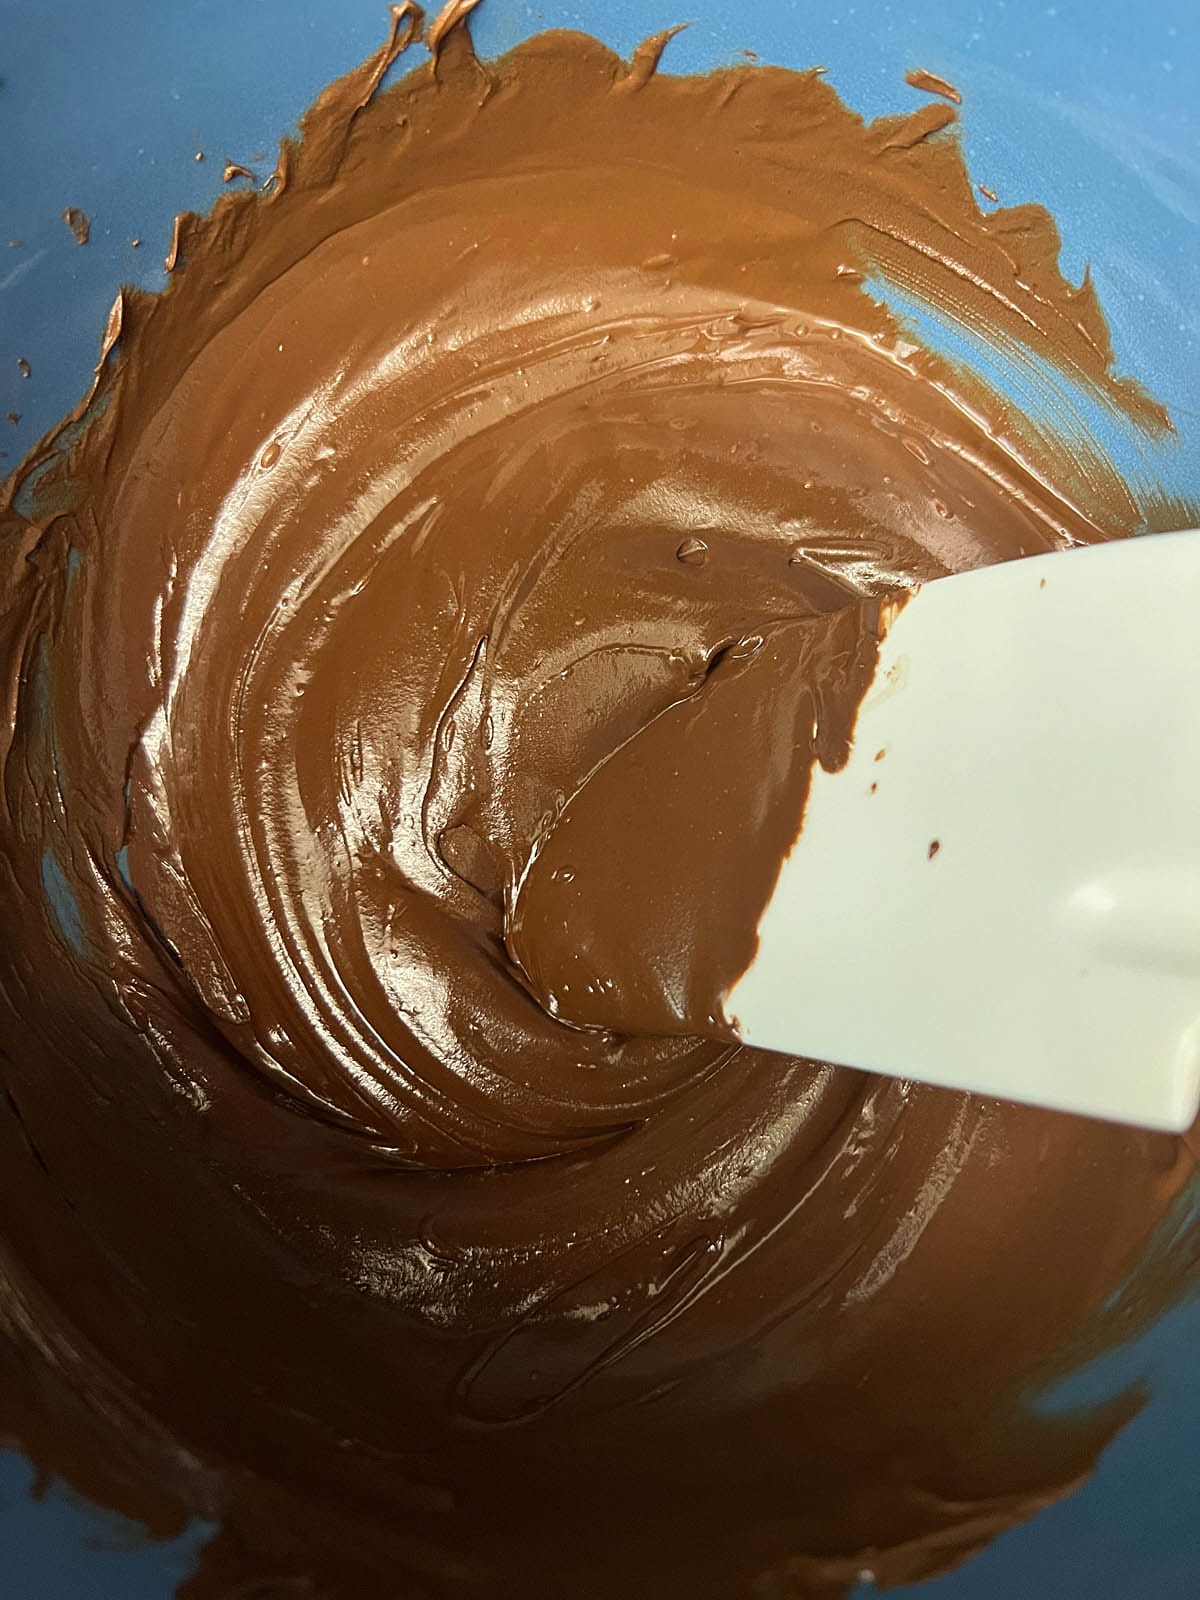 Melted chocolate in a large bowl.